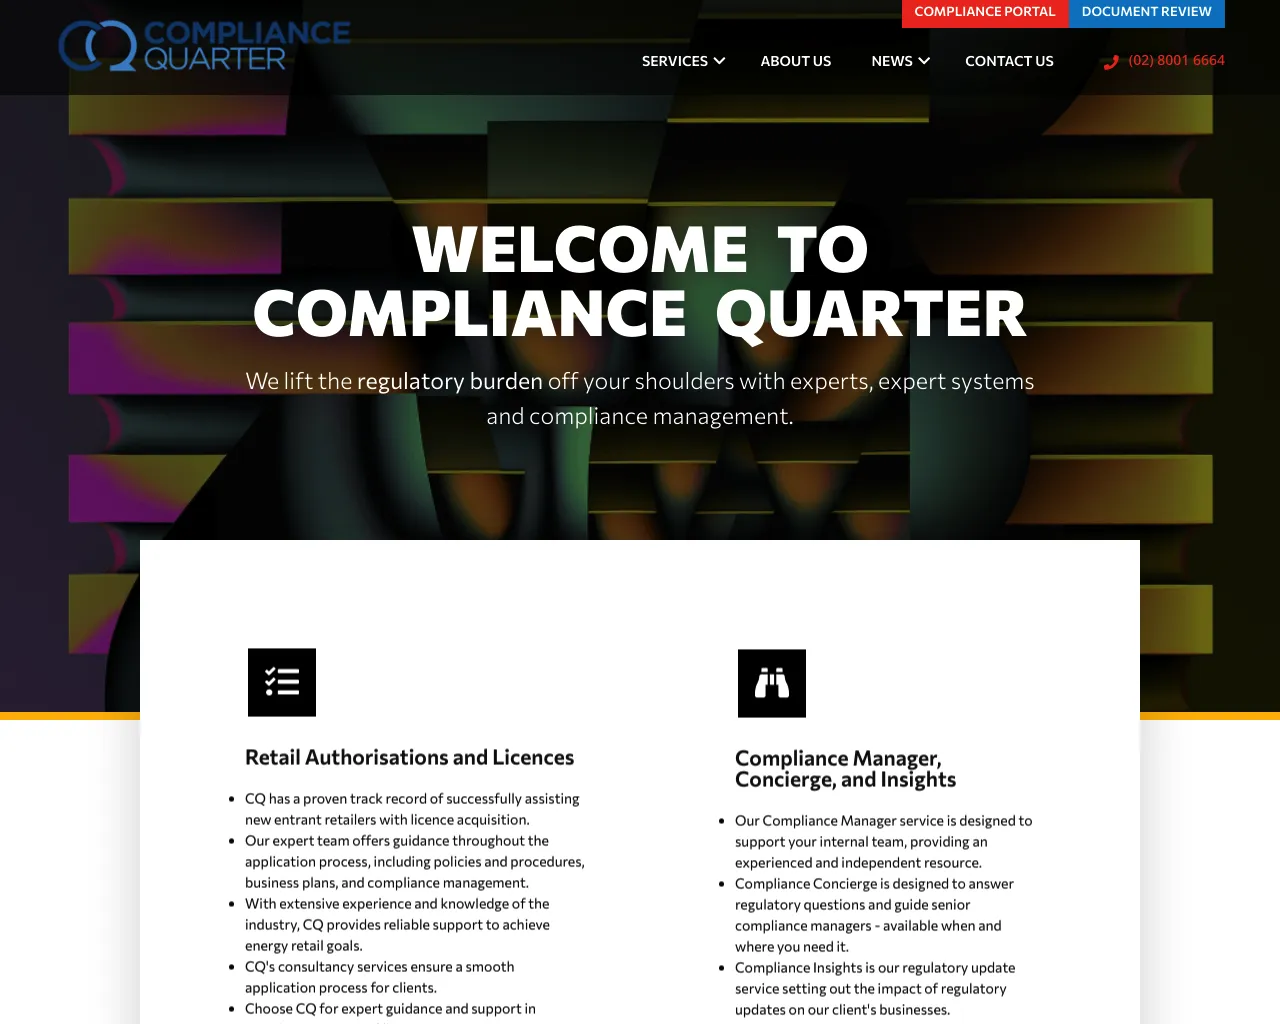 Expert Compliance Systems and Resources - Compliance Quarter